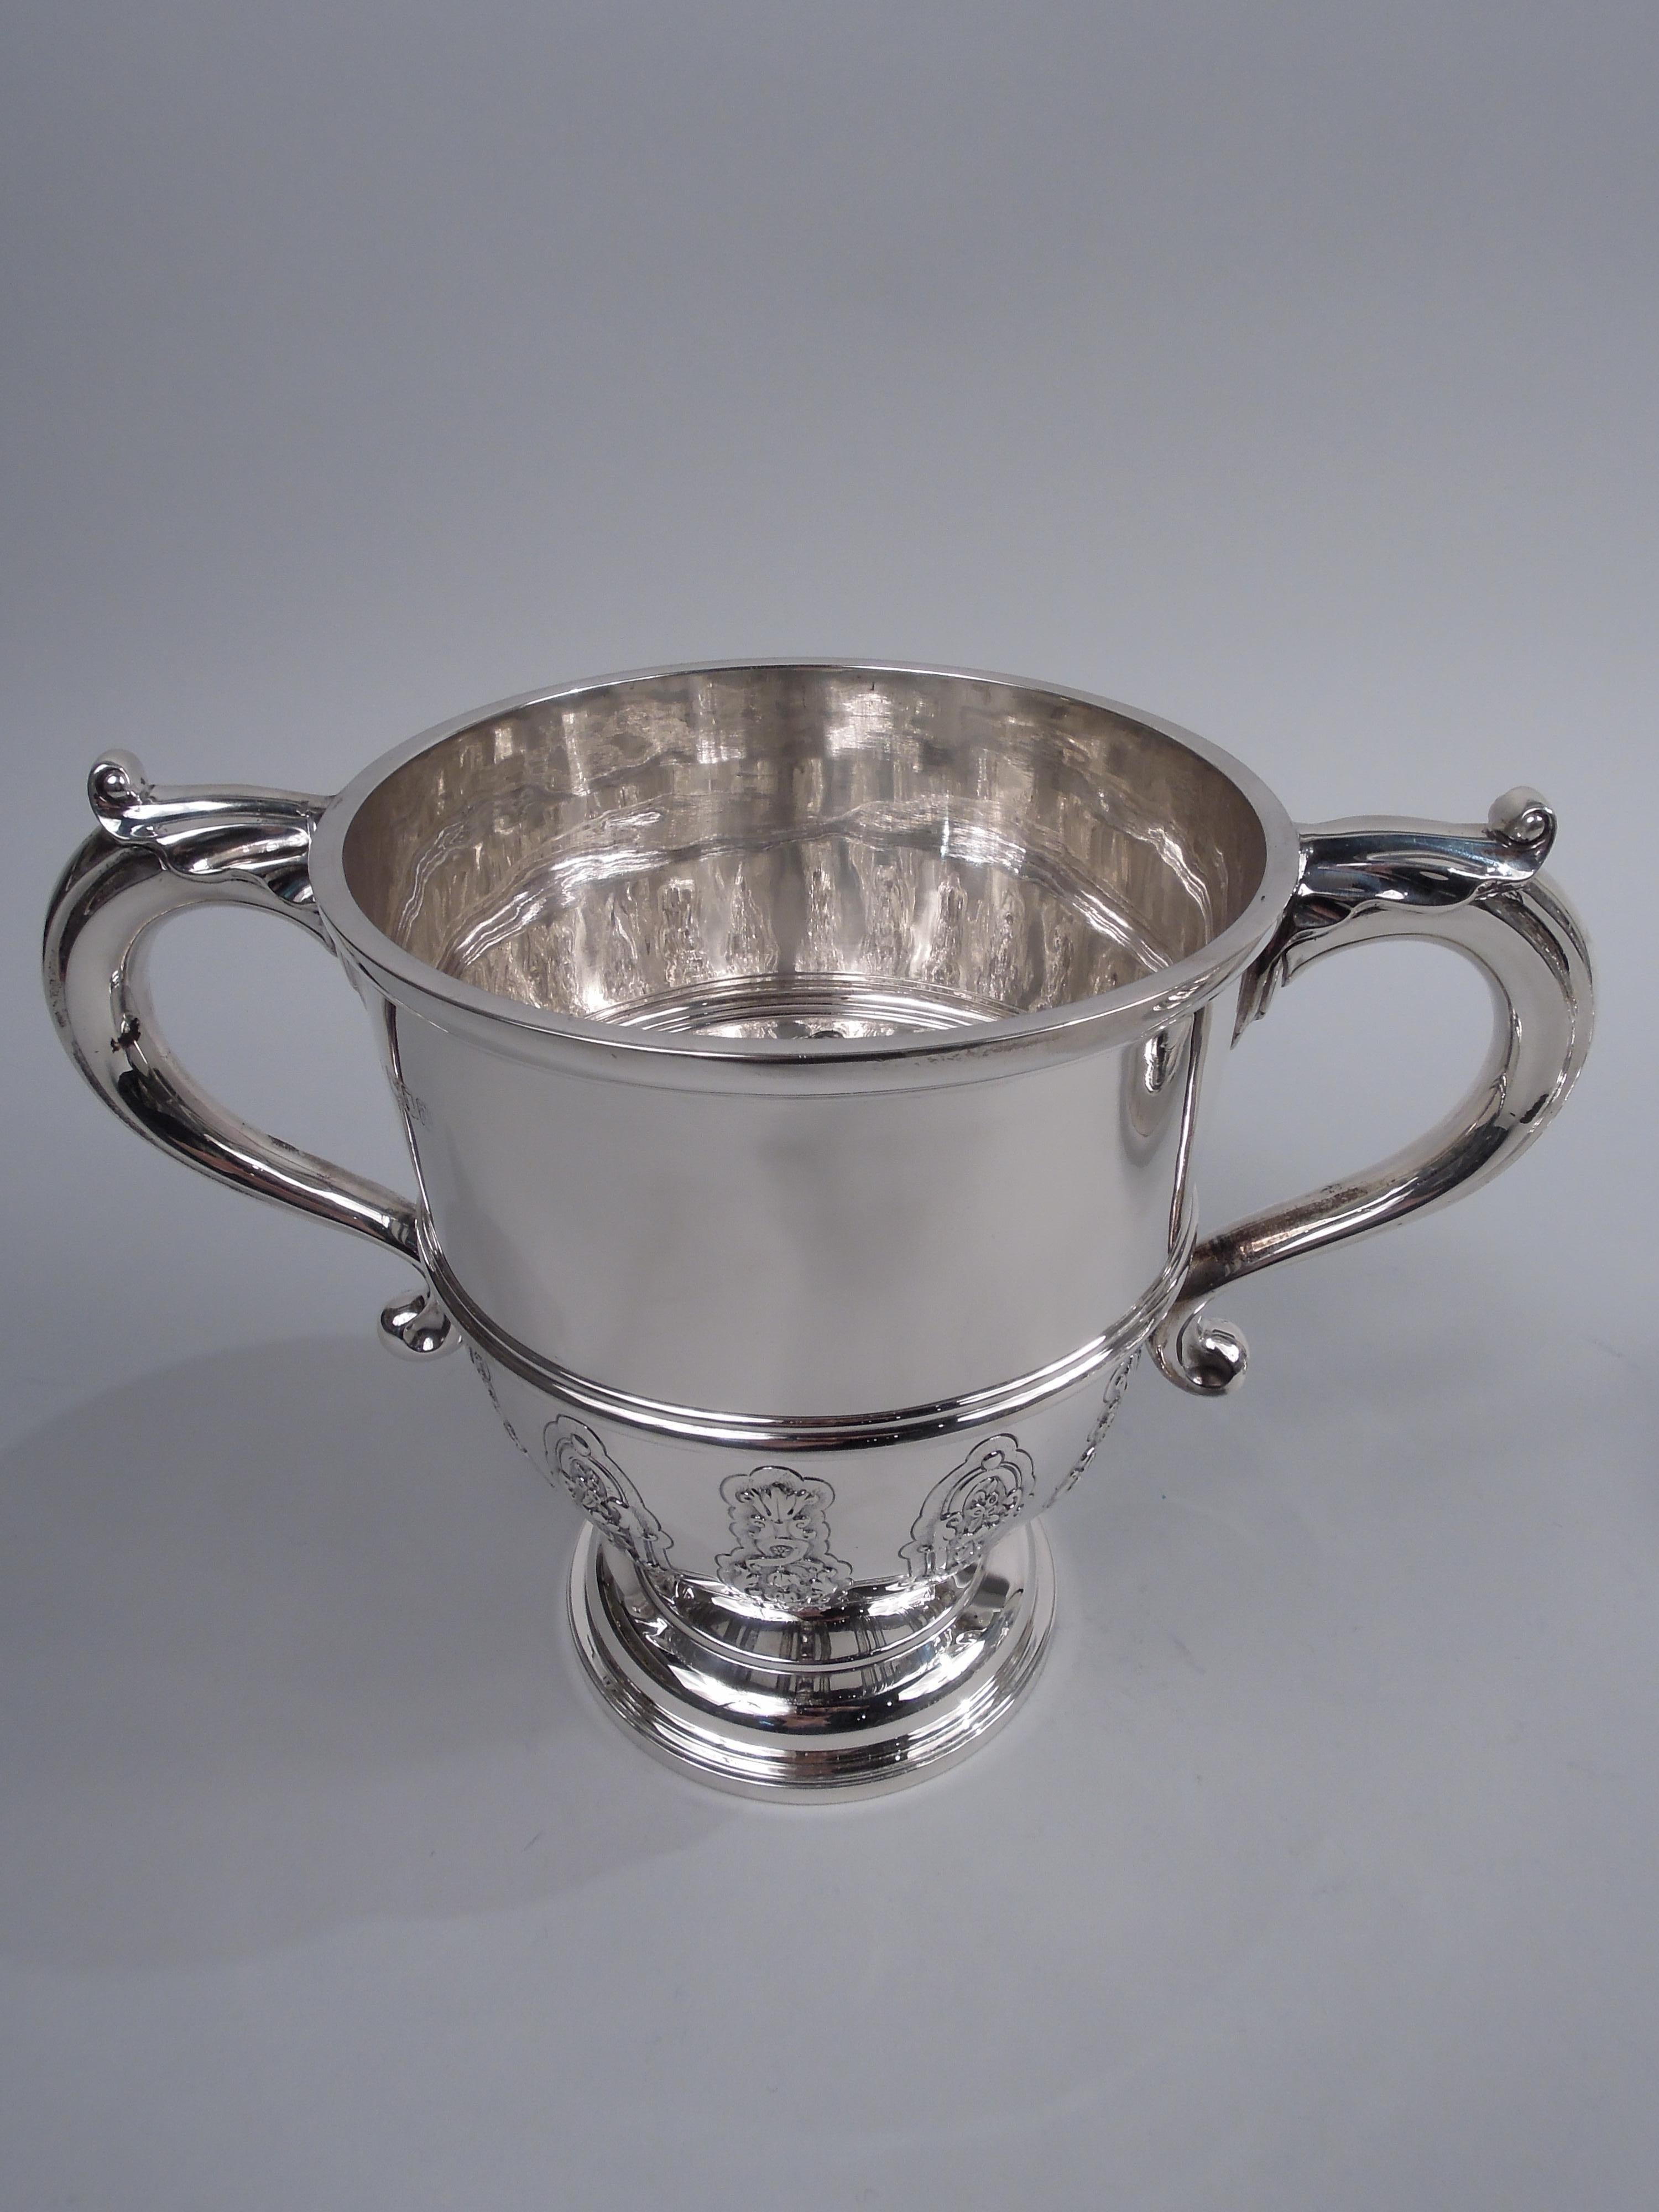 Crichton English Neoclassical Sterling Silver Covered Urn 1916 For Sale 2